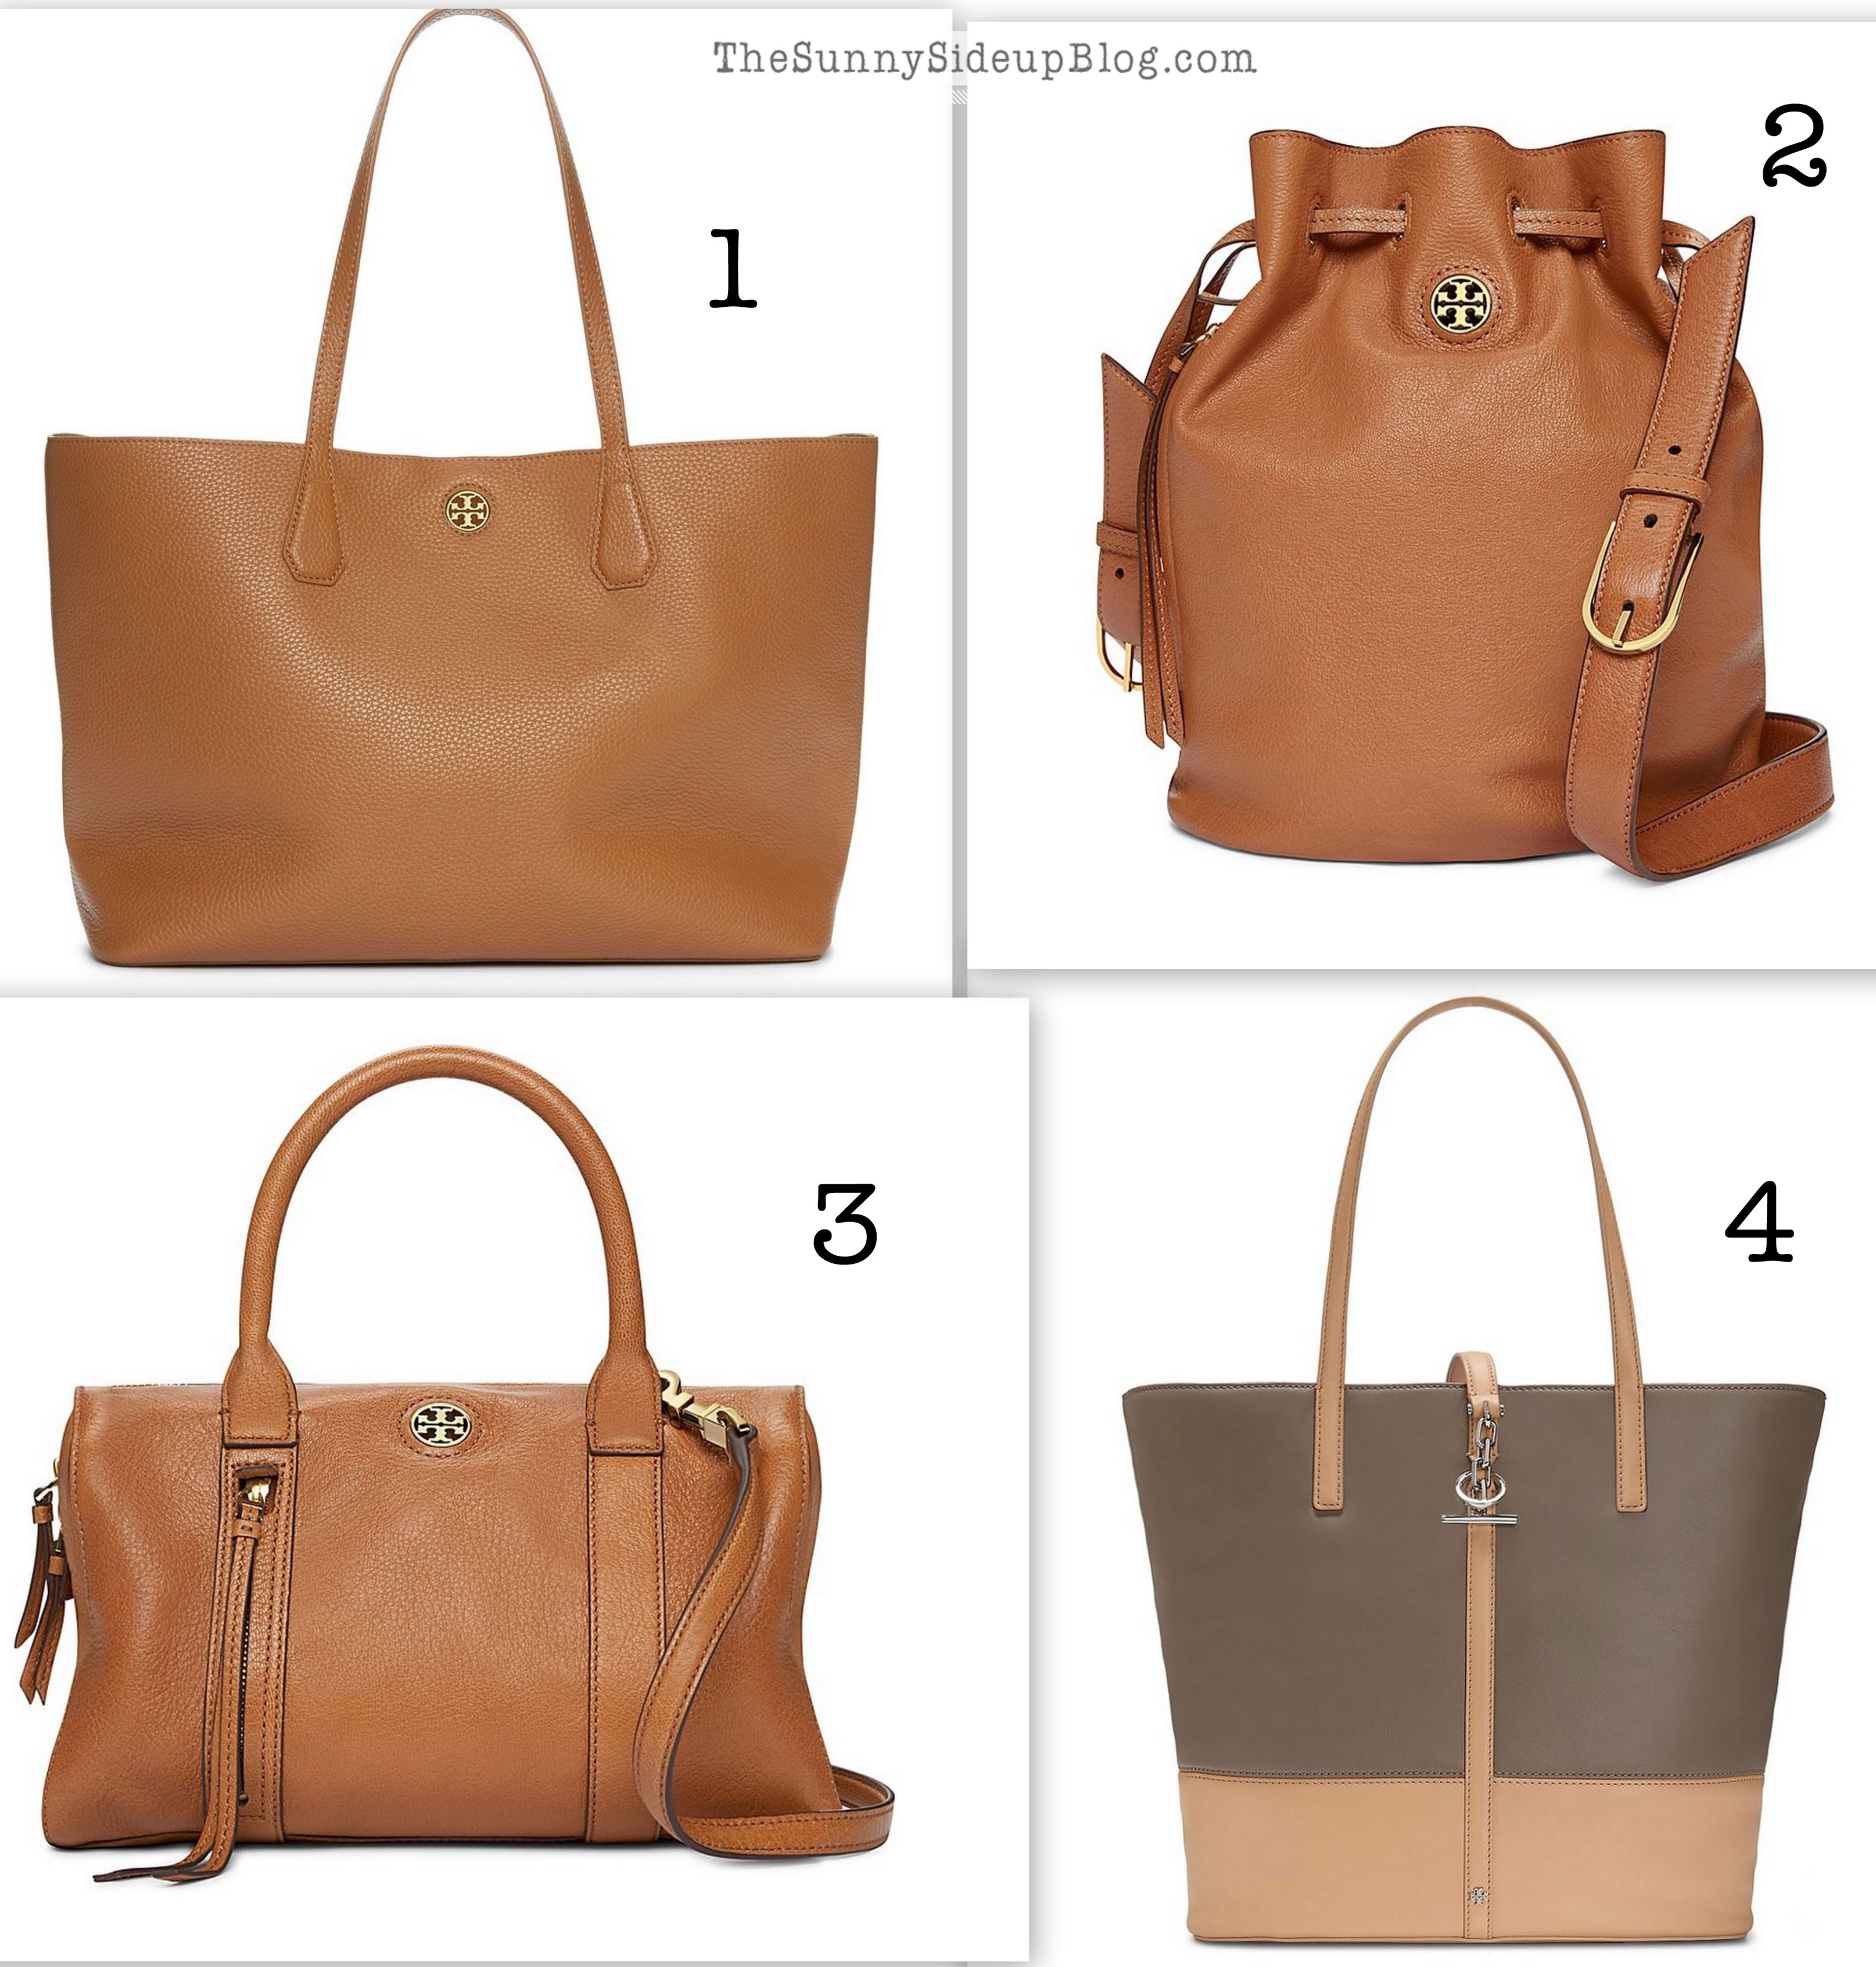 Favorite handbags for Fall The Sunny Side Up Blog